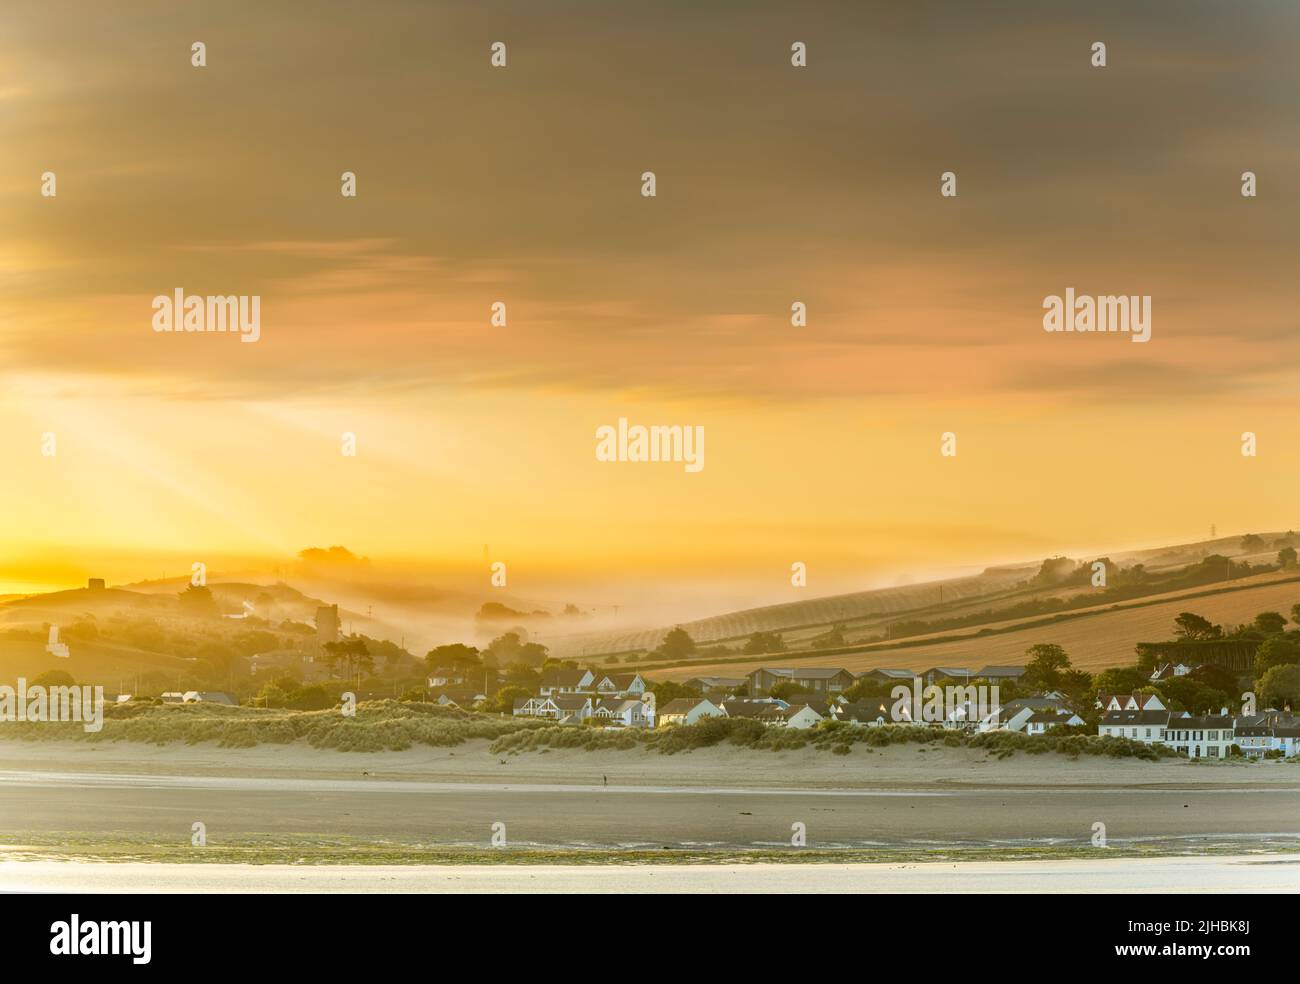 Instow, North Devon, England. Just after dawn, low lying mist drifts across the River Torridge estuary, shrouding the little church in the coastal vil Stock Photo